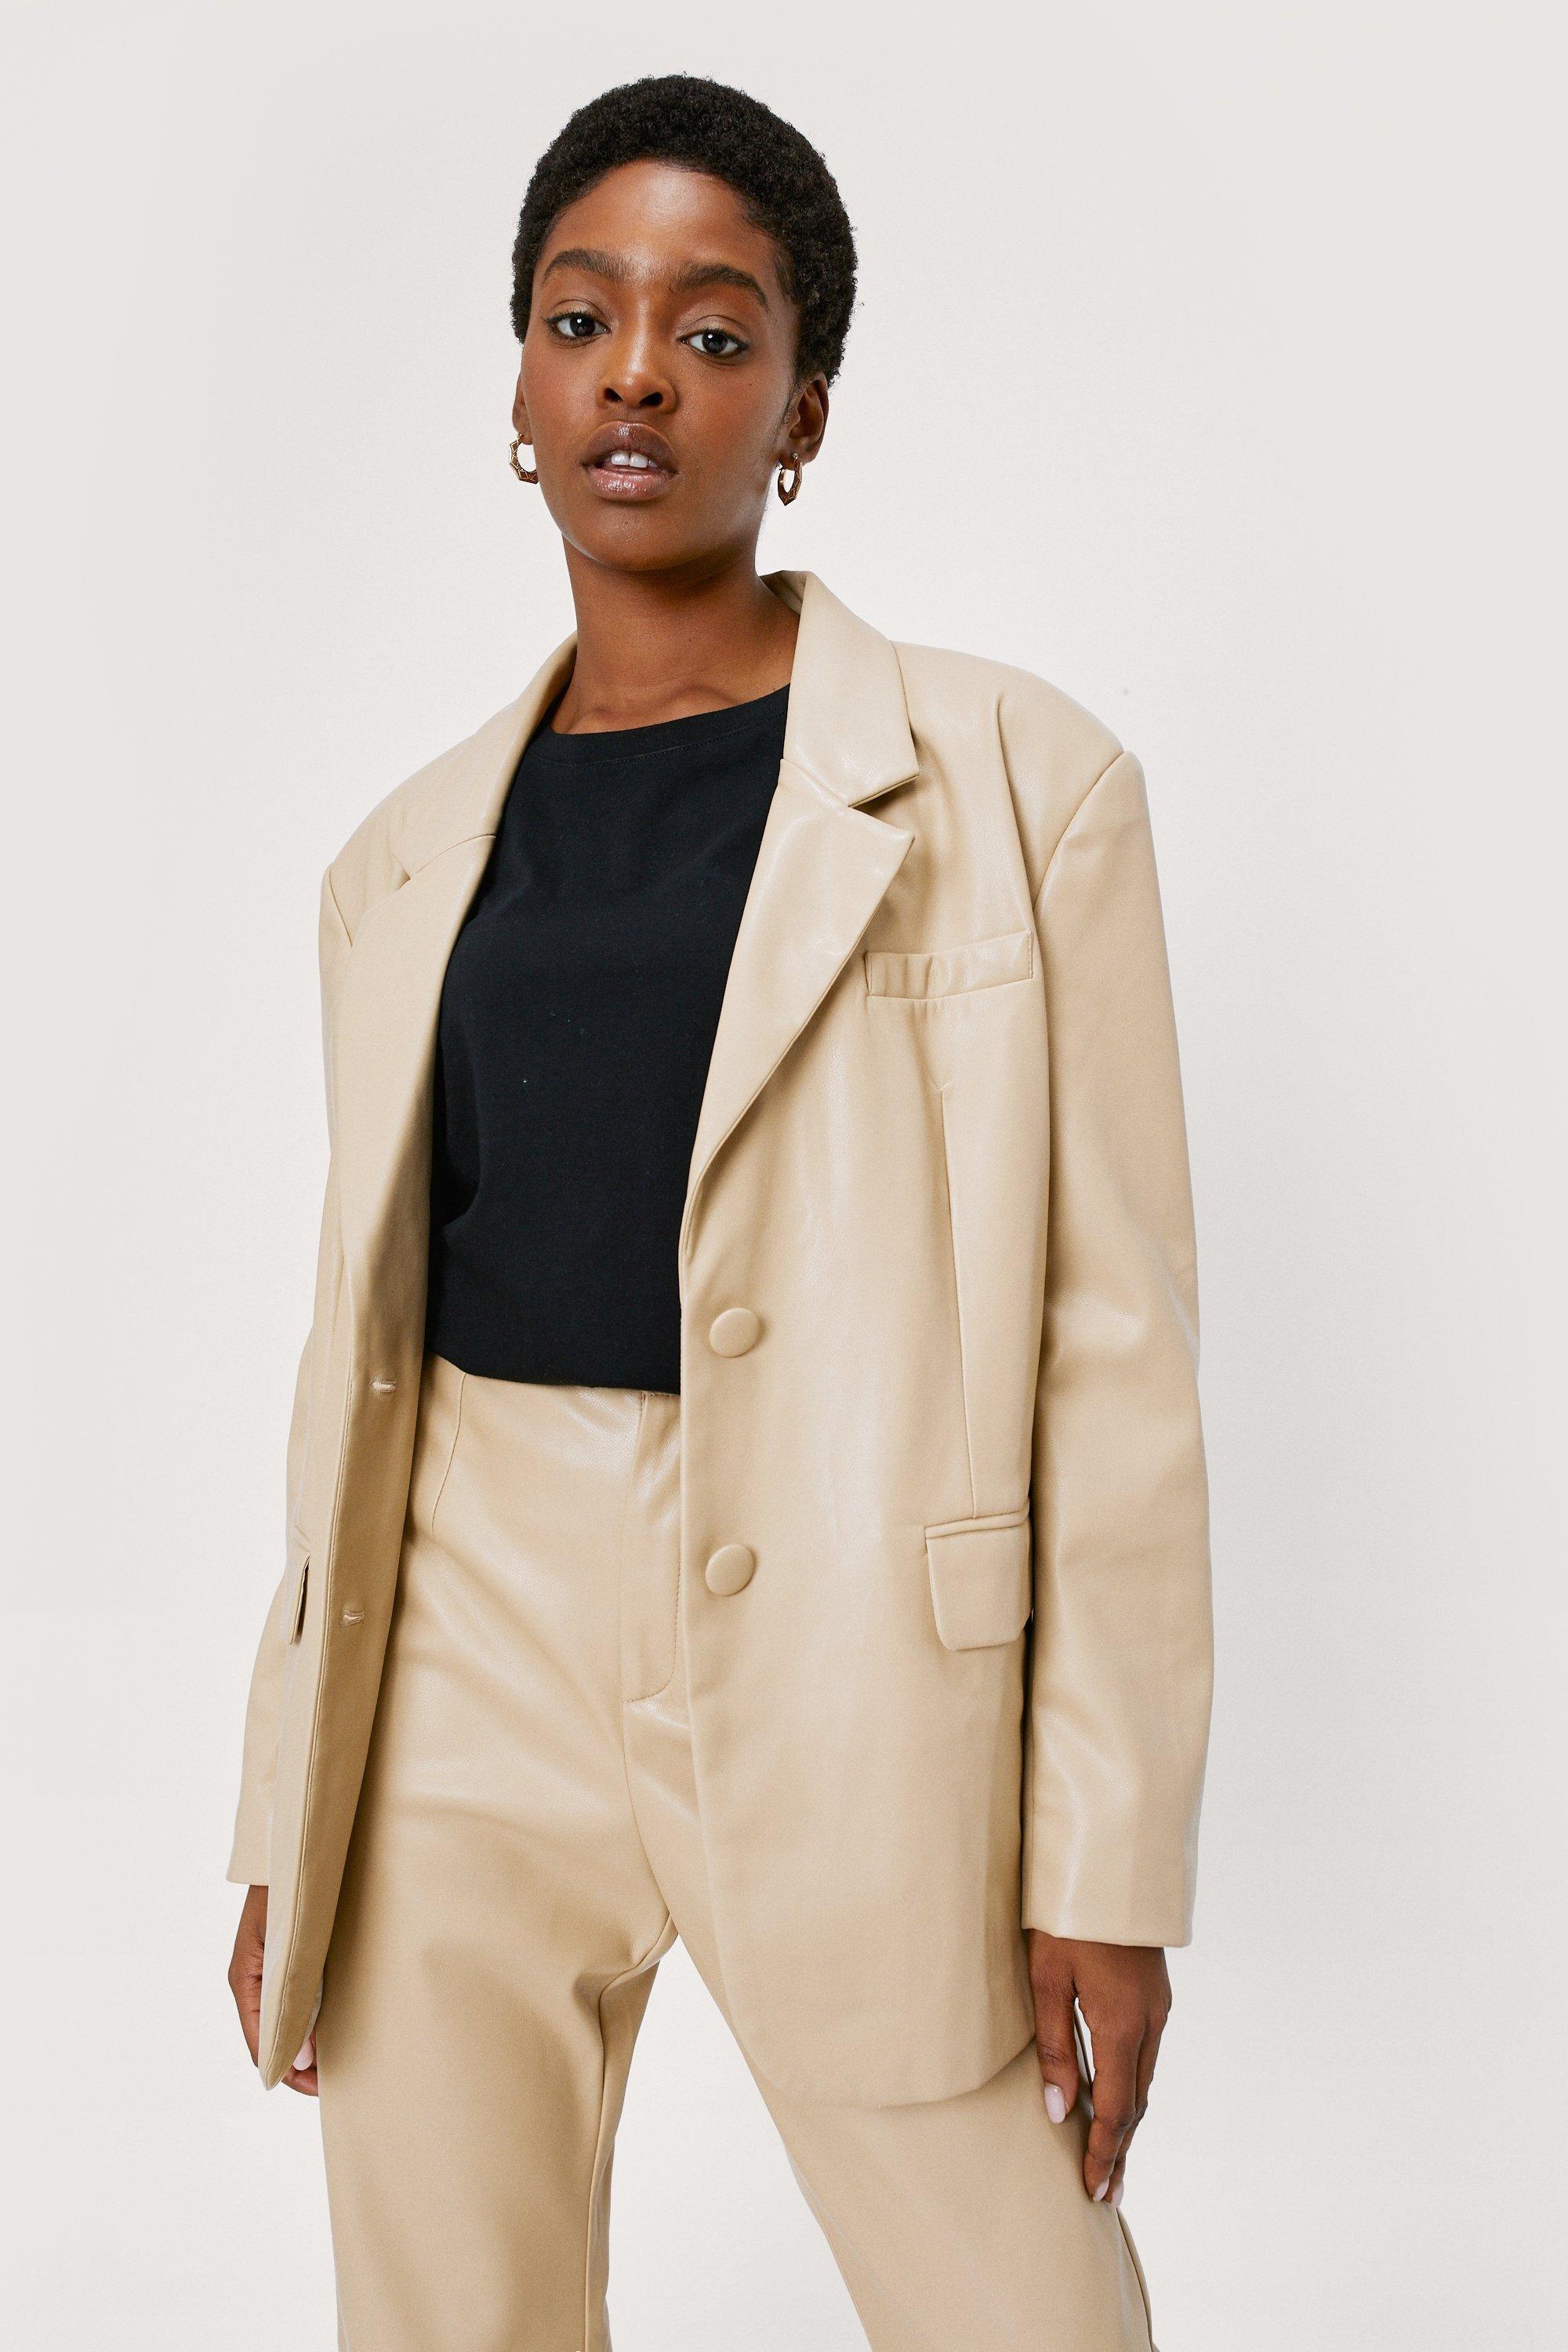 Boohoo Faux Leather Oversized Suit Blazer in Natural | Lyst